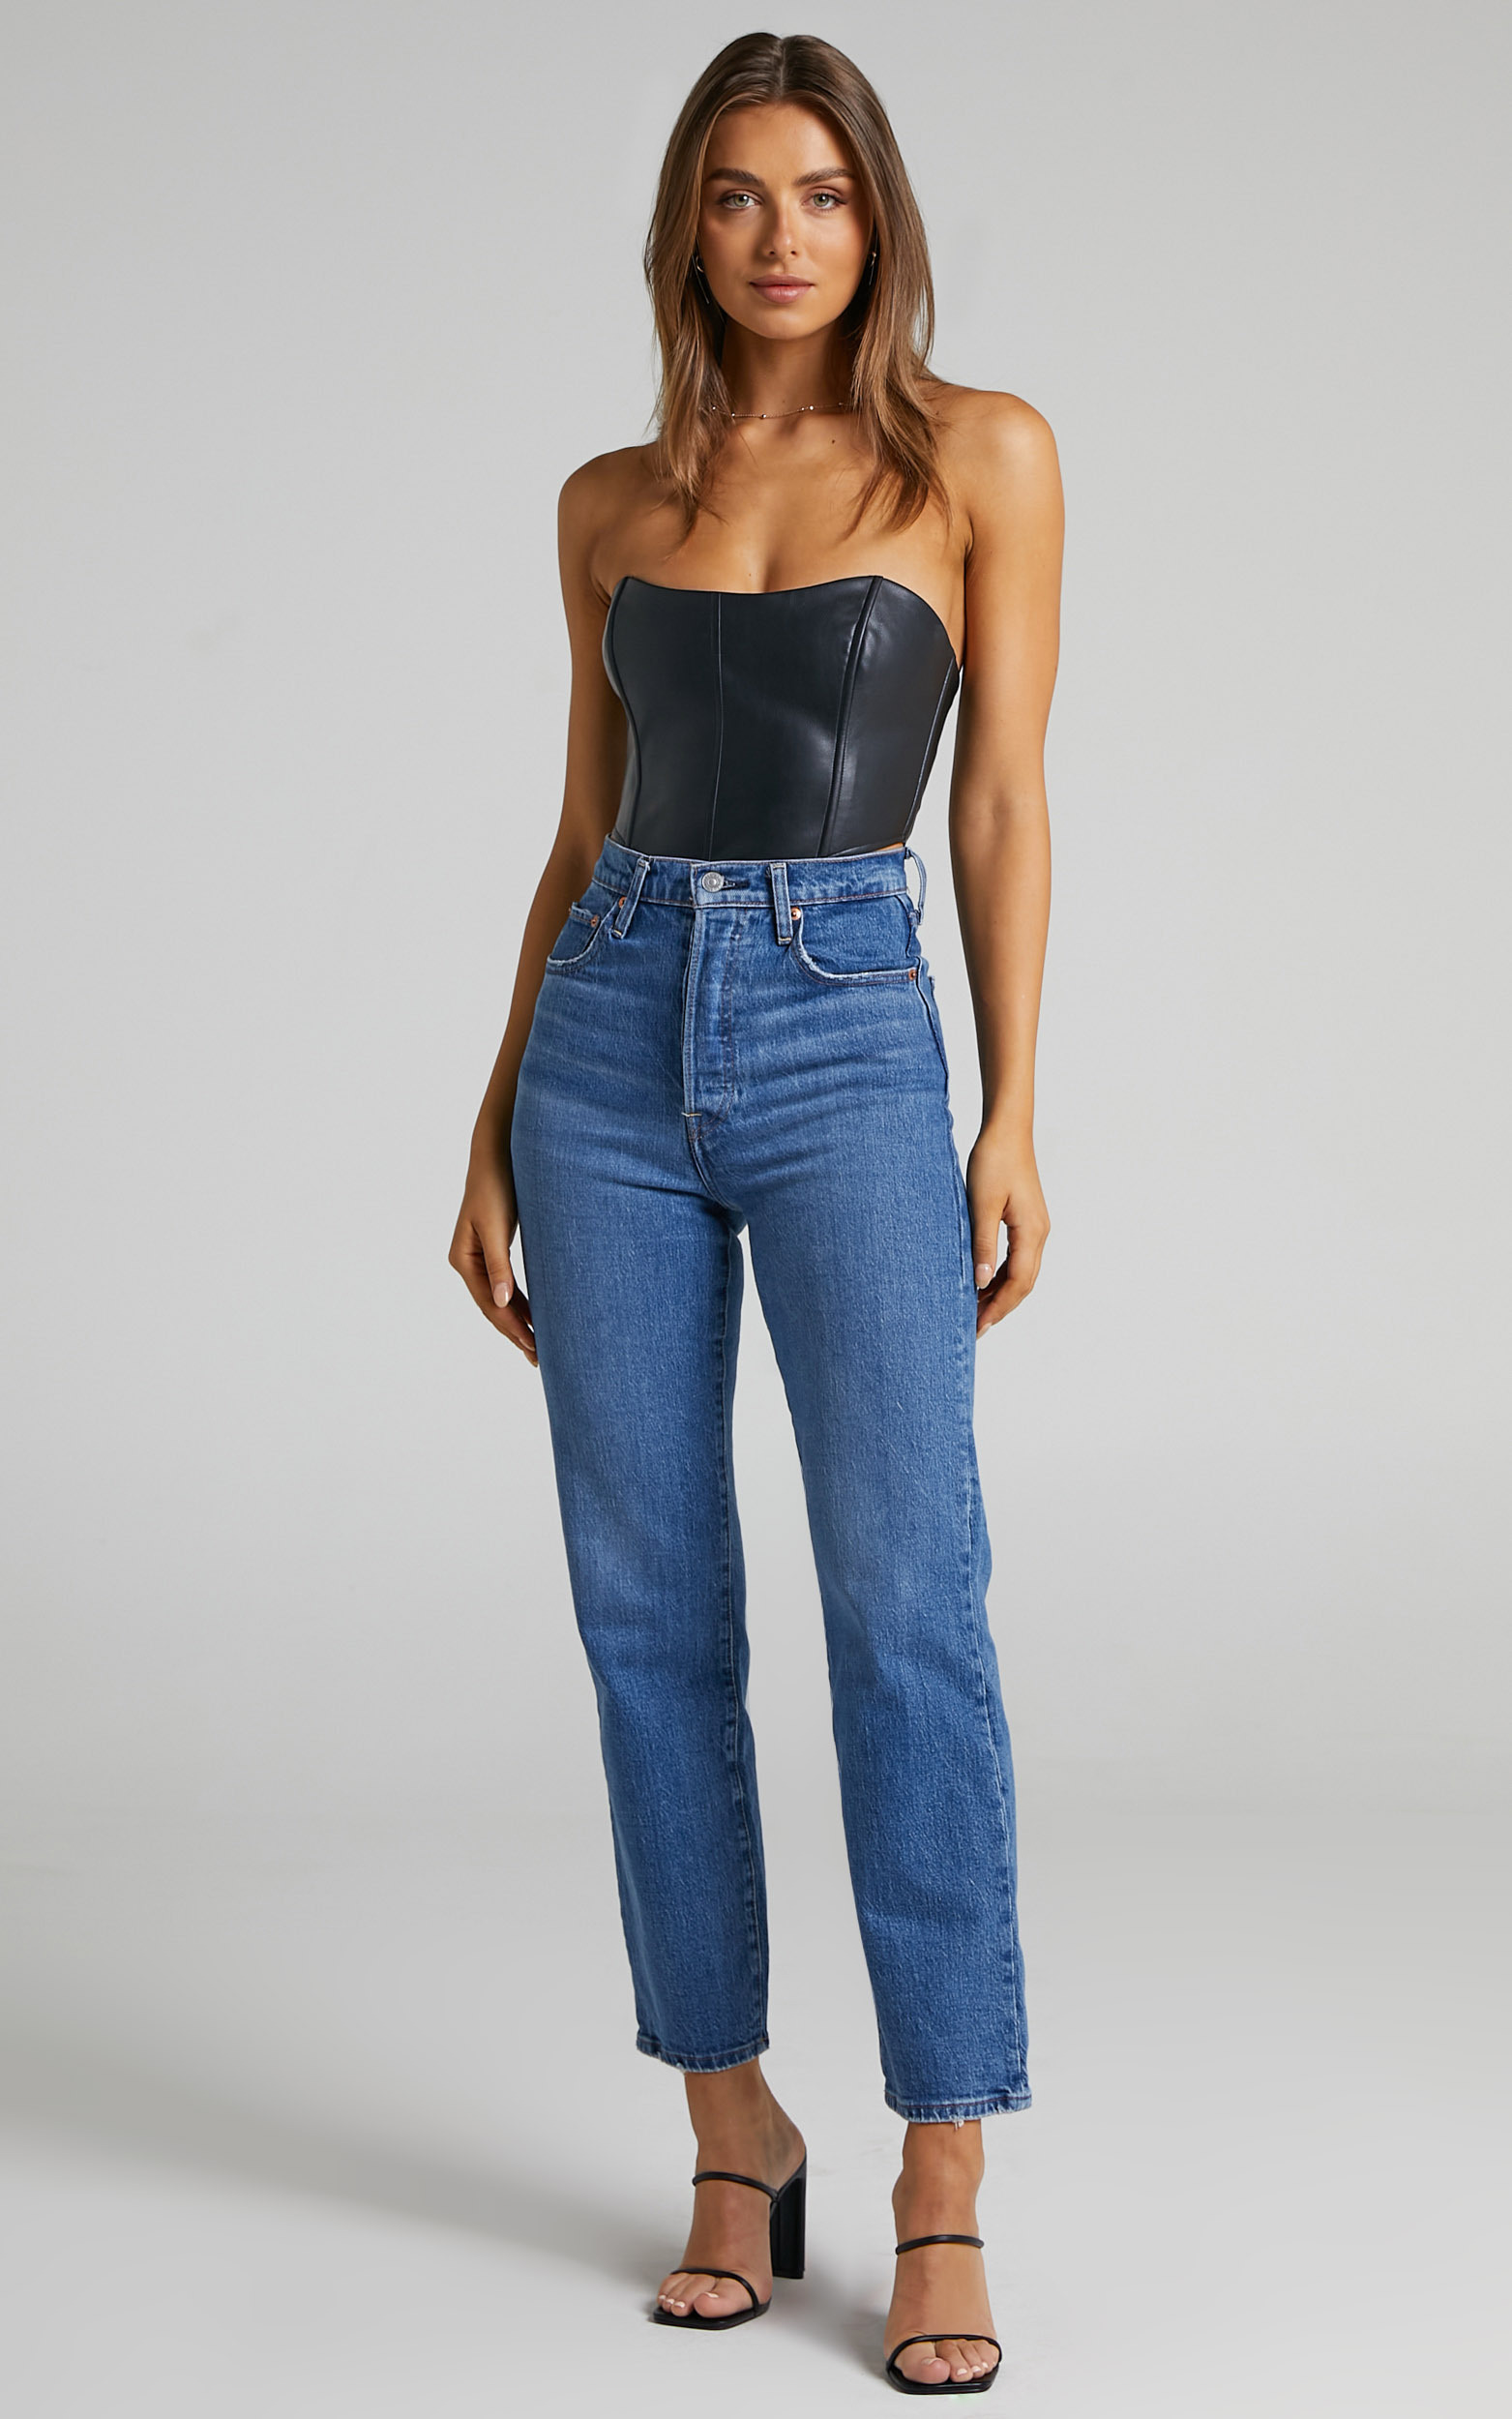 Levi's - Ribcage Straight Ankle Jeans in Jazz Jive Together - 06, BLU1, hi-res image number null